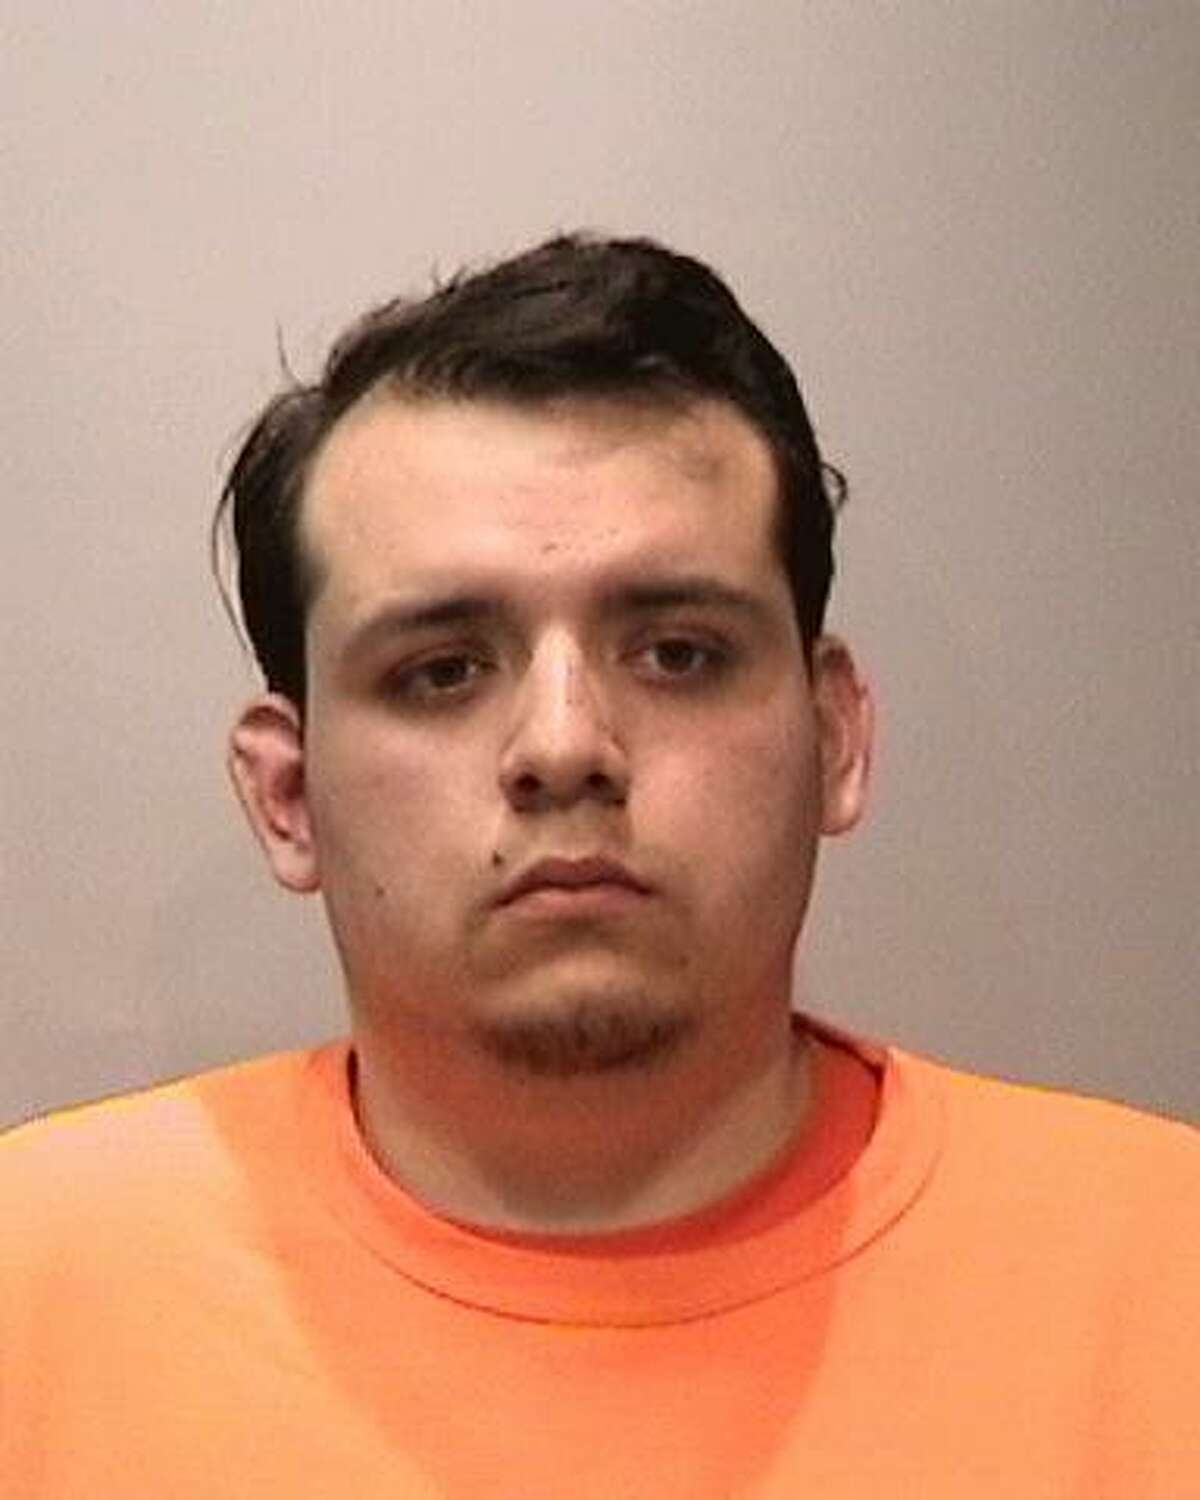 Pablo Munoz, an assistant teacher at San Francisco’s LePort Montessori School, was arrested on suspicion of calling in bomb threats to the school, police said.